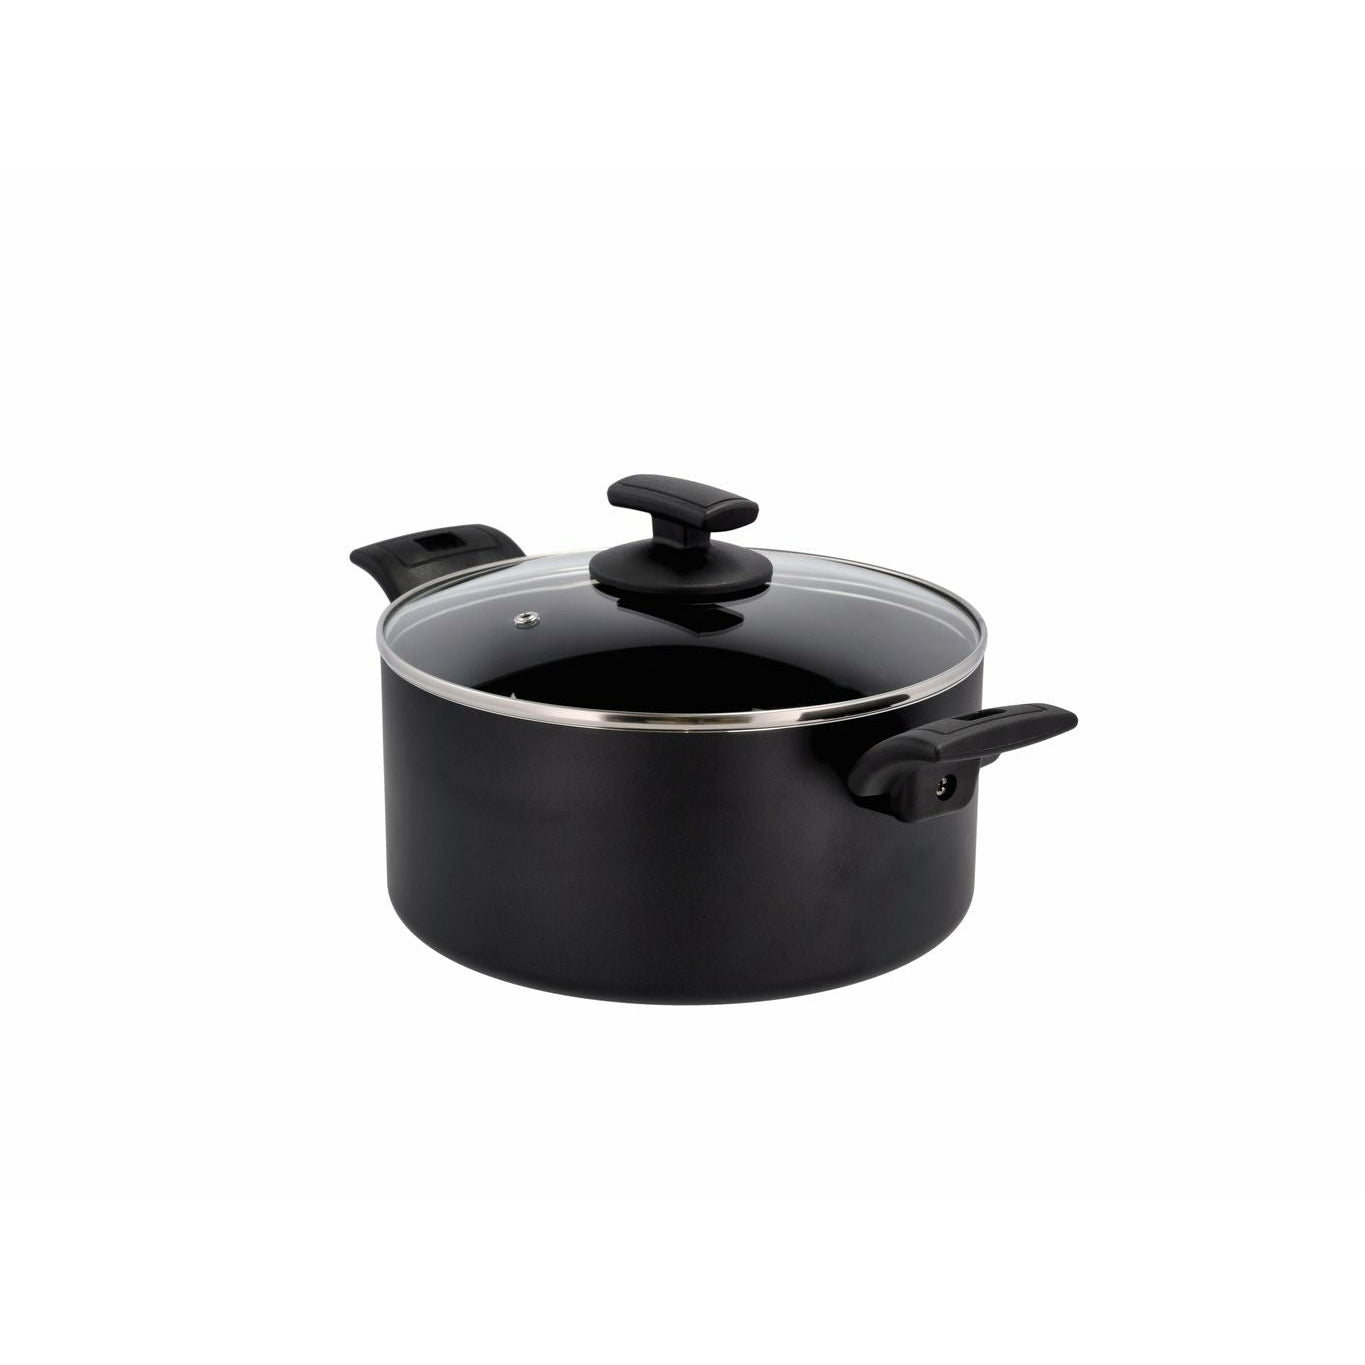 Morsø 79 Nord Reborn Cooking Pot With Lid, 5 Liters